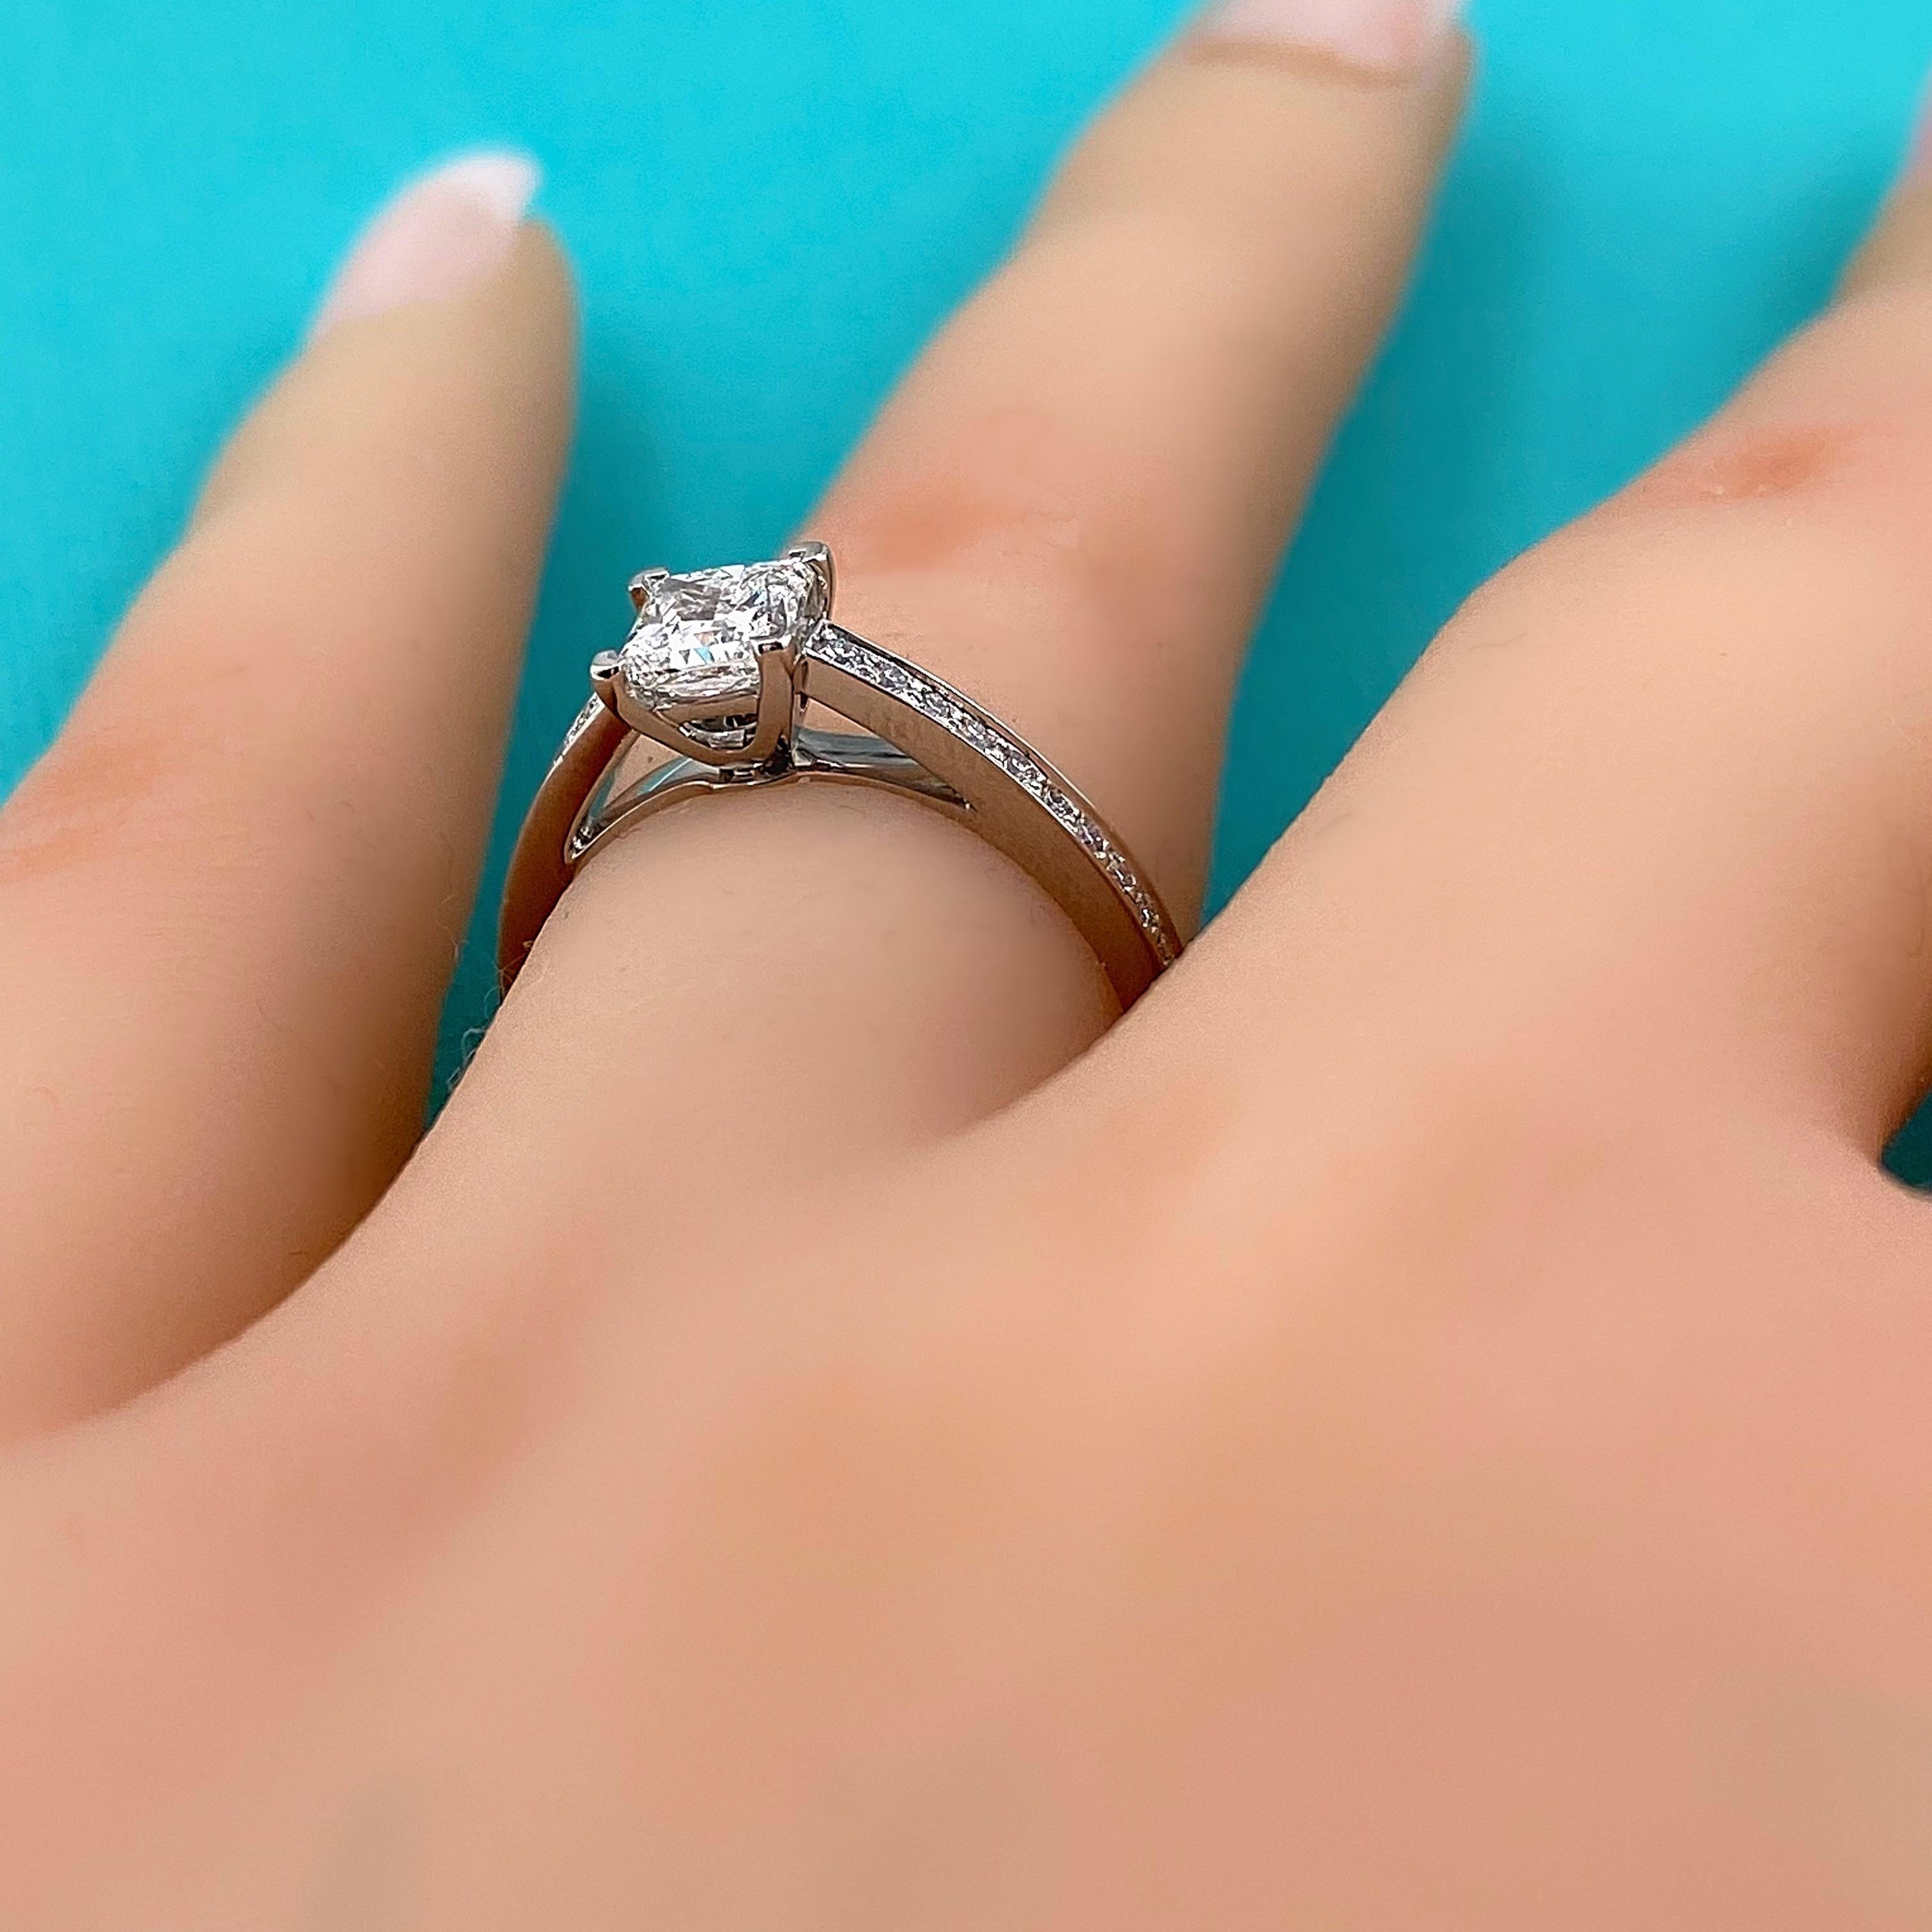 Tiffany & Co. Grace Princess Diamond Engagement Ring 0.76 Tcw E VVS1 Platinum In Excellent Condition For Sale In San Diego, CA